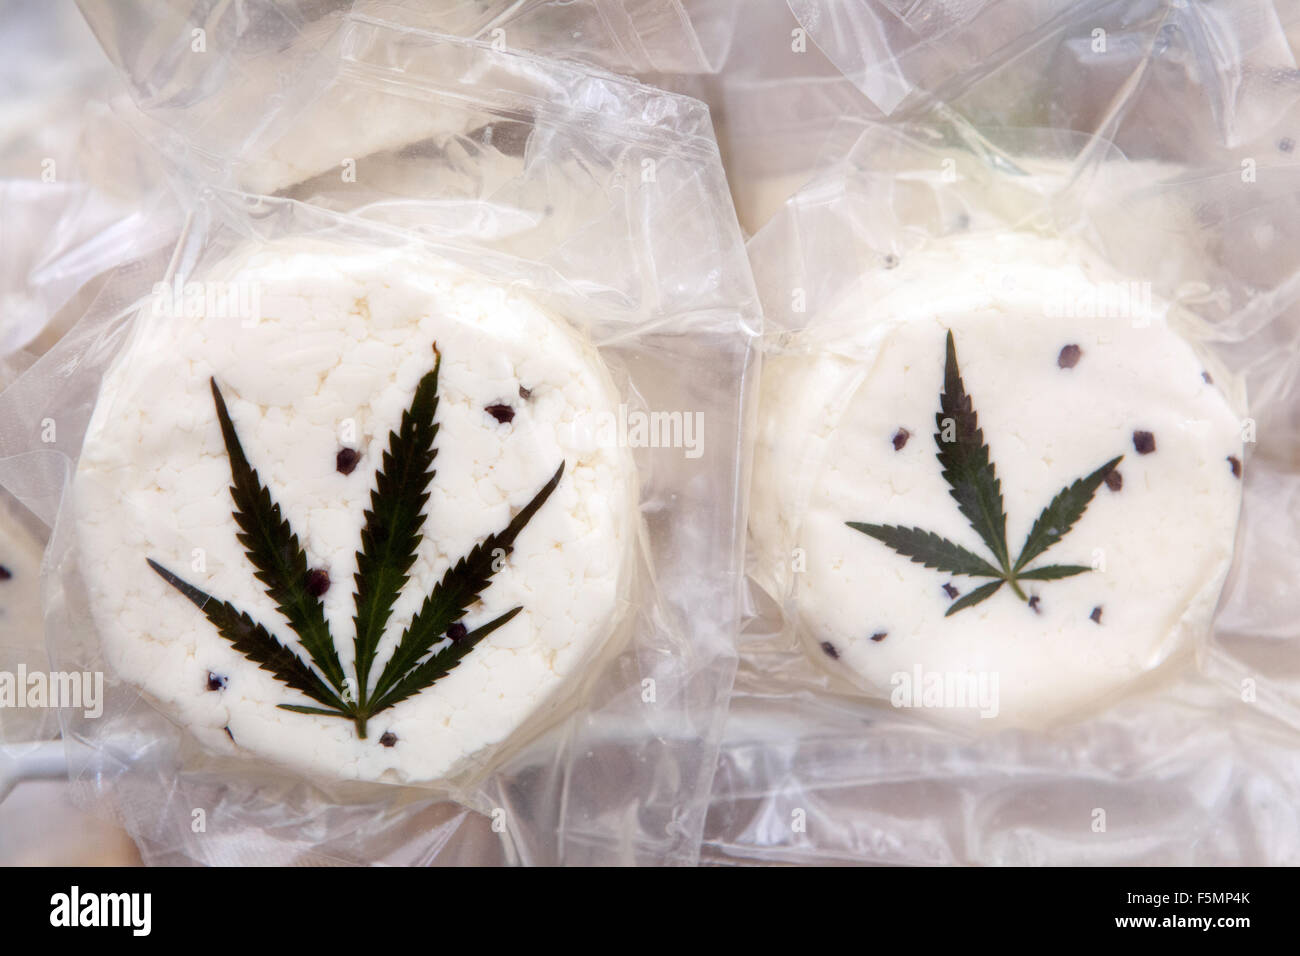 Sheep's cheese vacuum-packed, decorated with a cannabis leaf Prague Czech Republic Family farm product Stock Photo